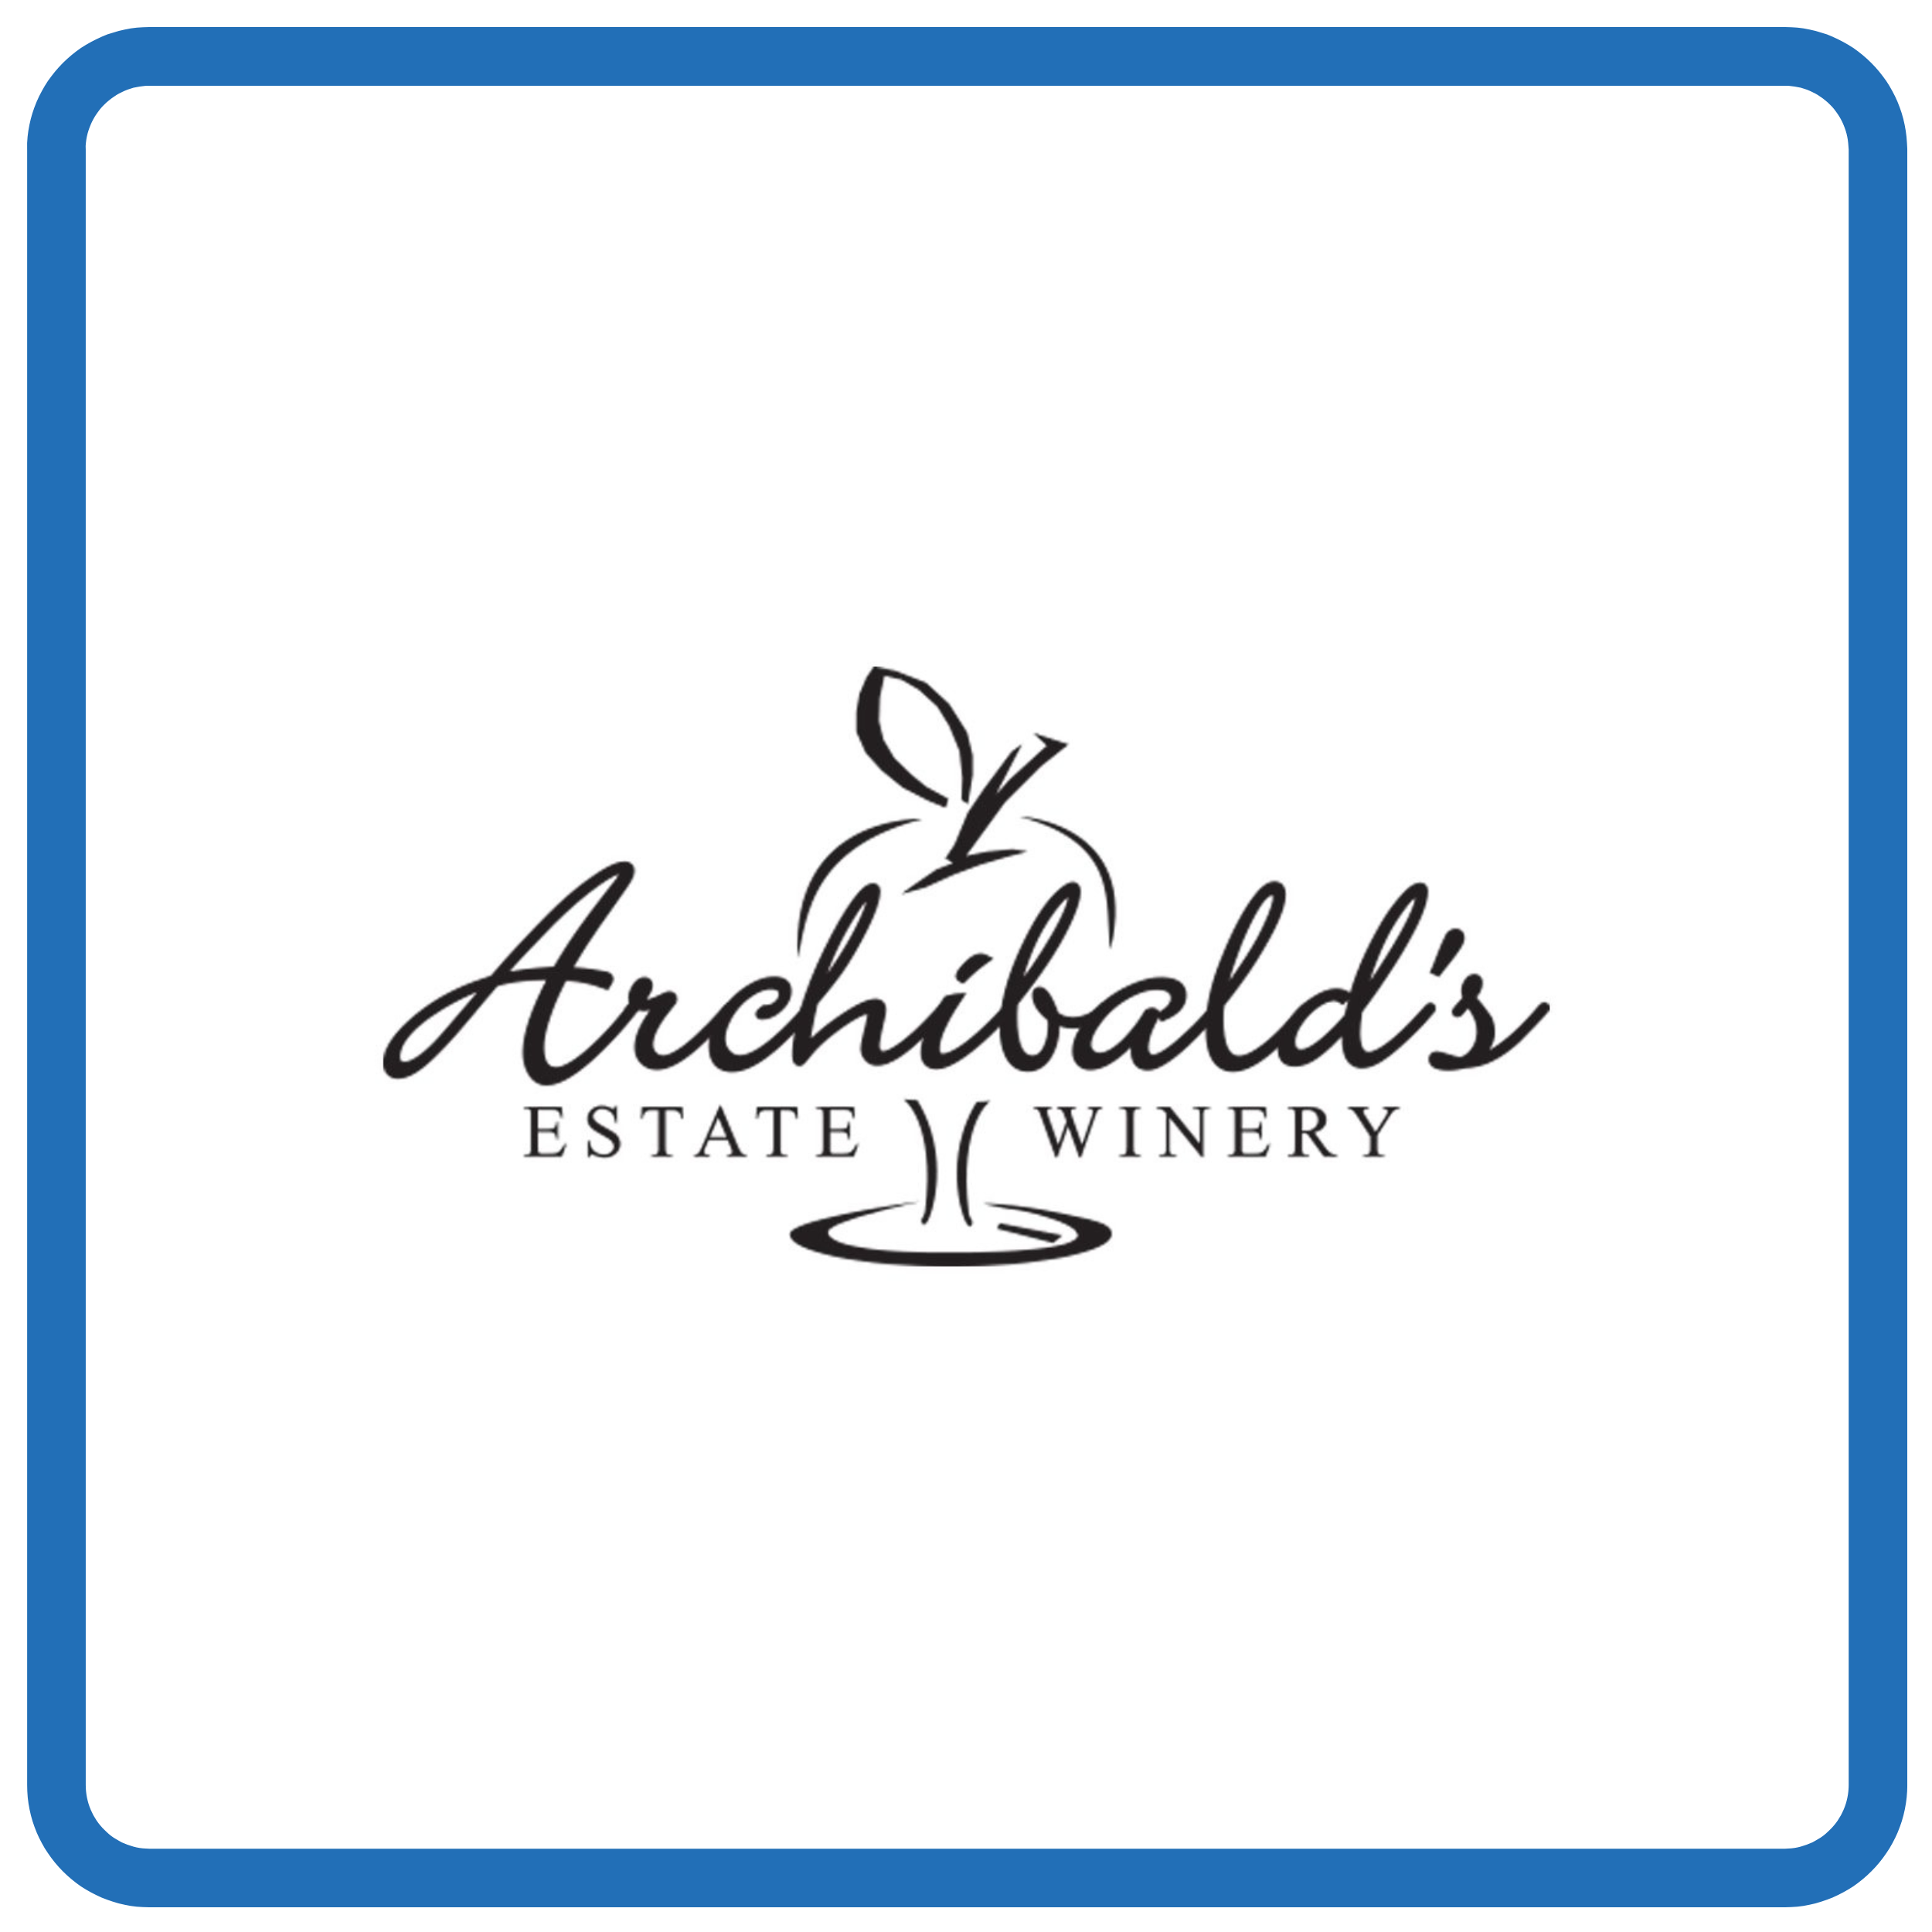 2500x2500-Archibalds Winery.png